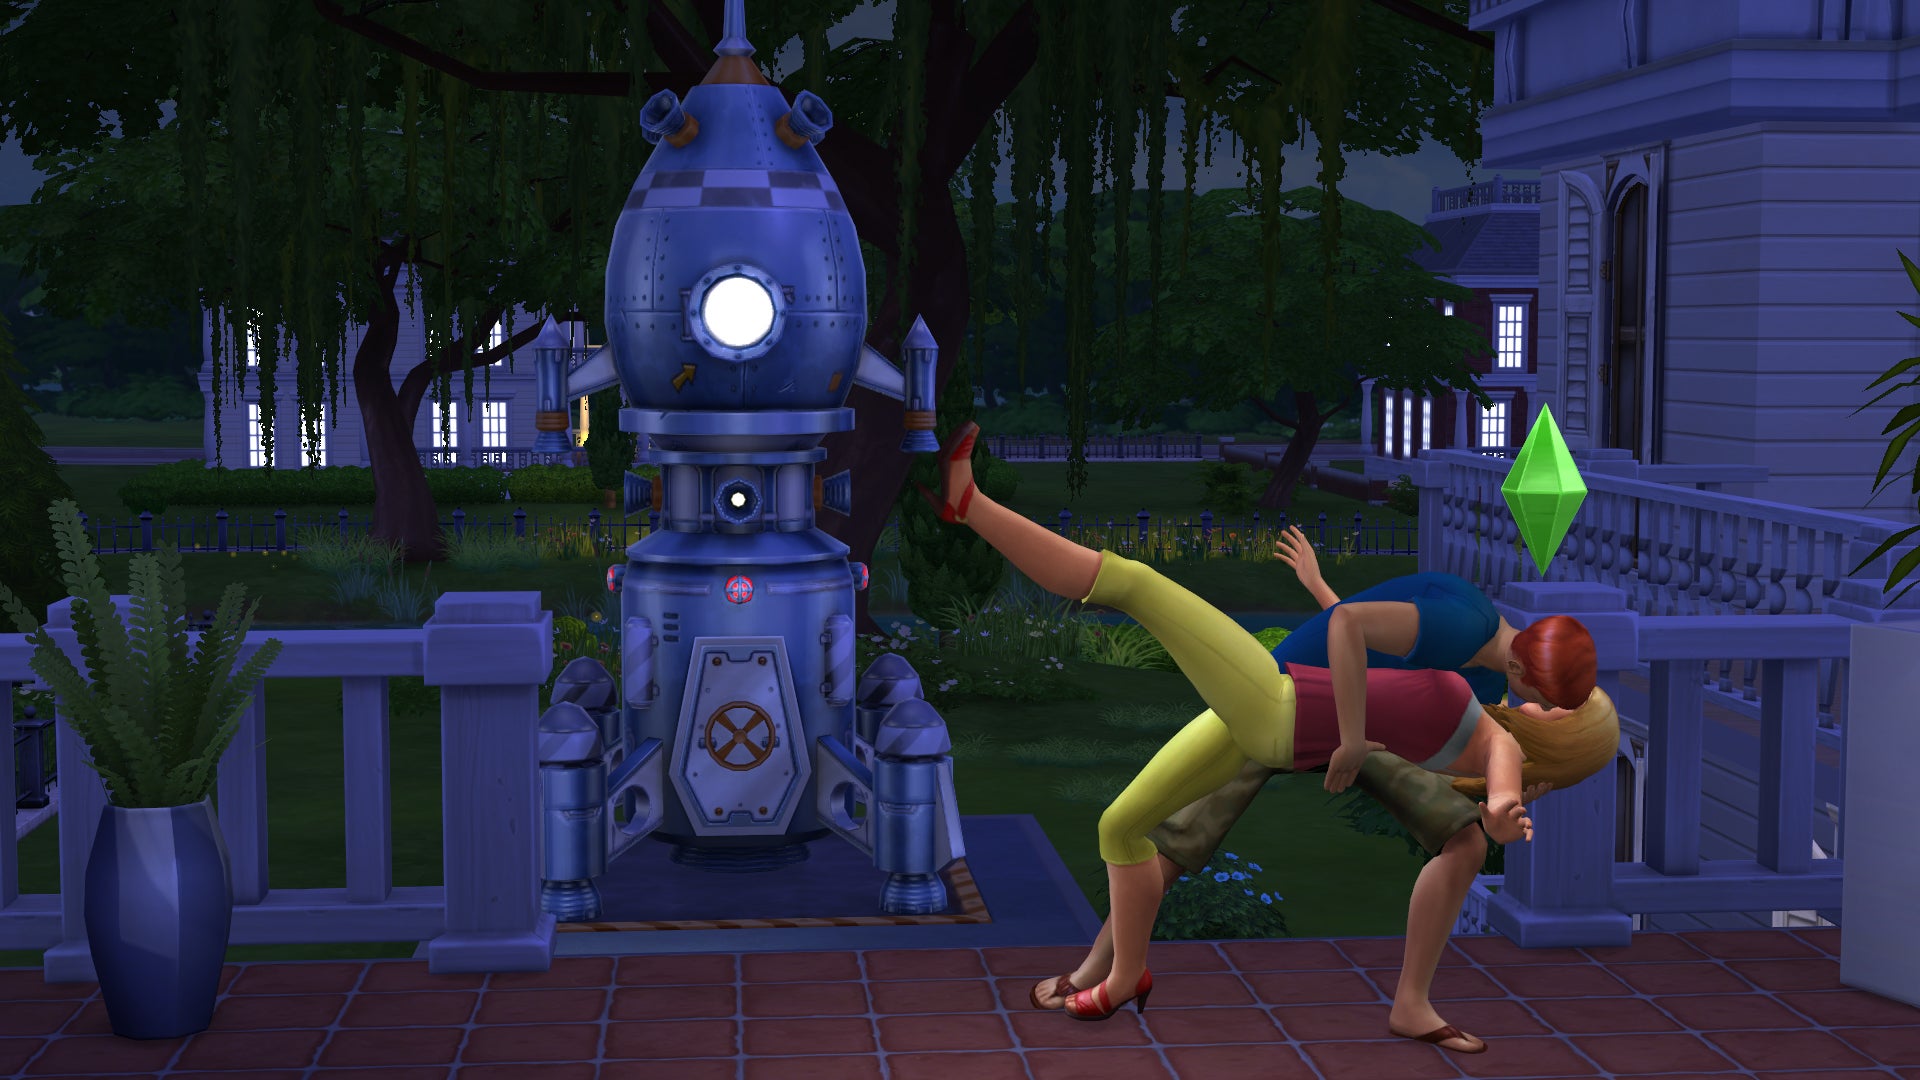 The Sims 4: Mixed Feelings Have Never Been so Much Fun | VG247